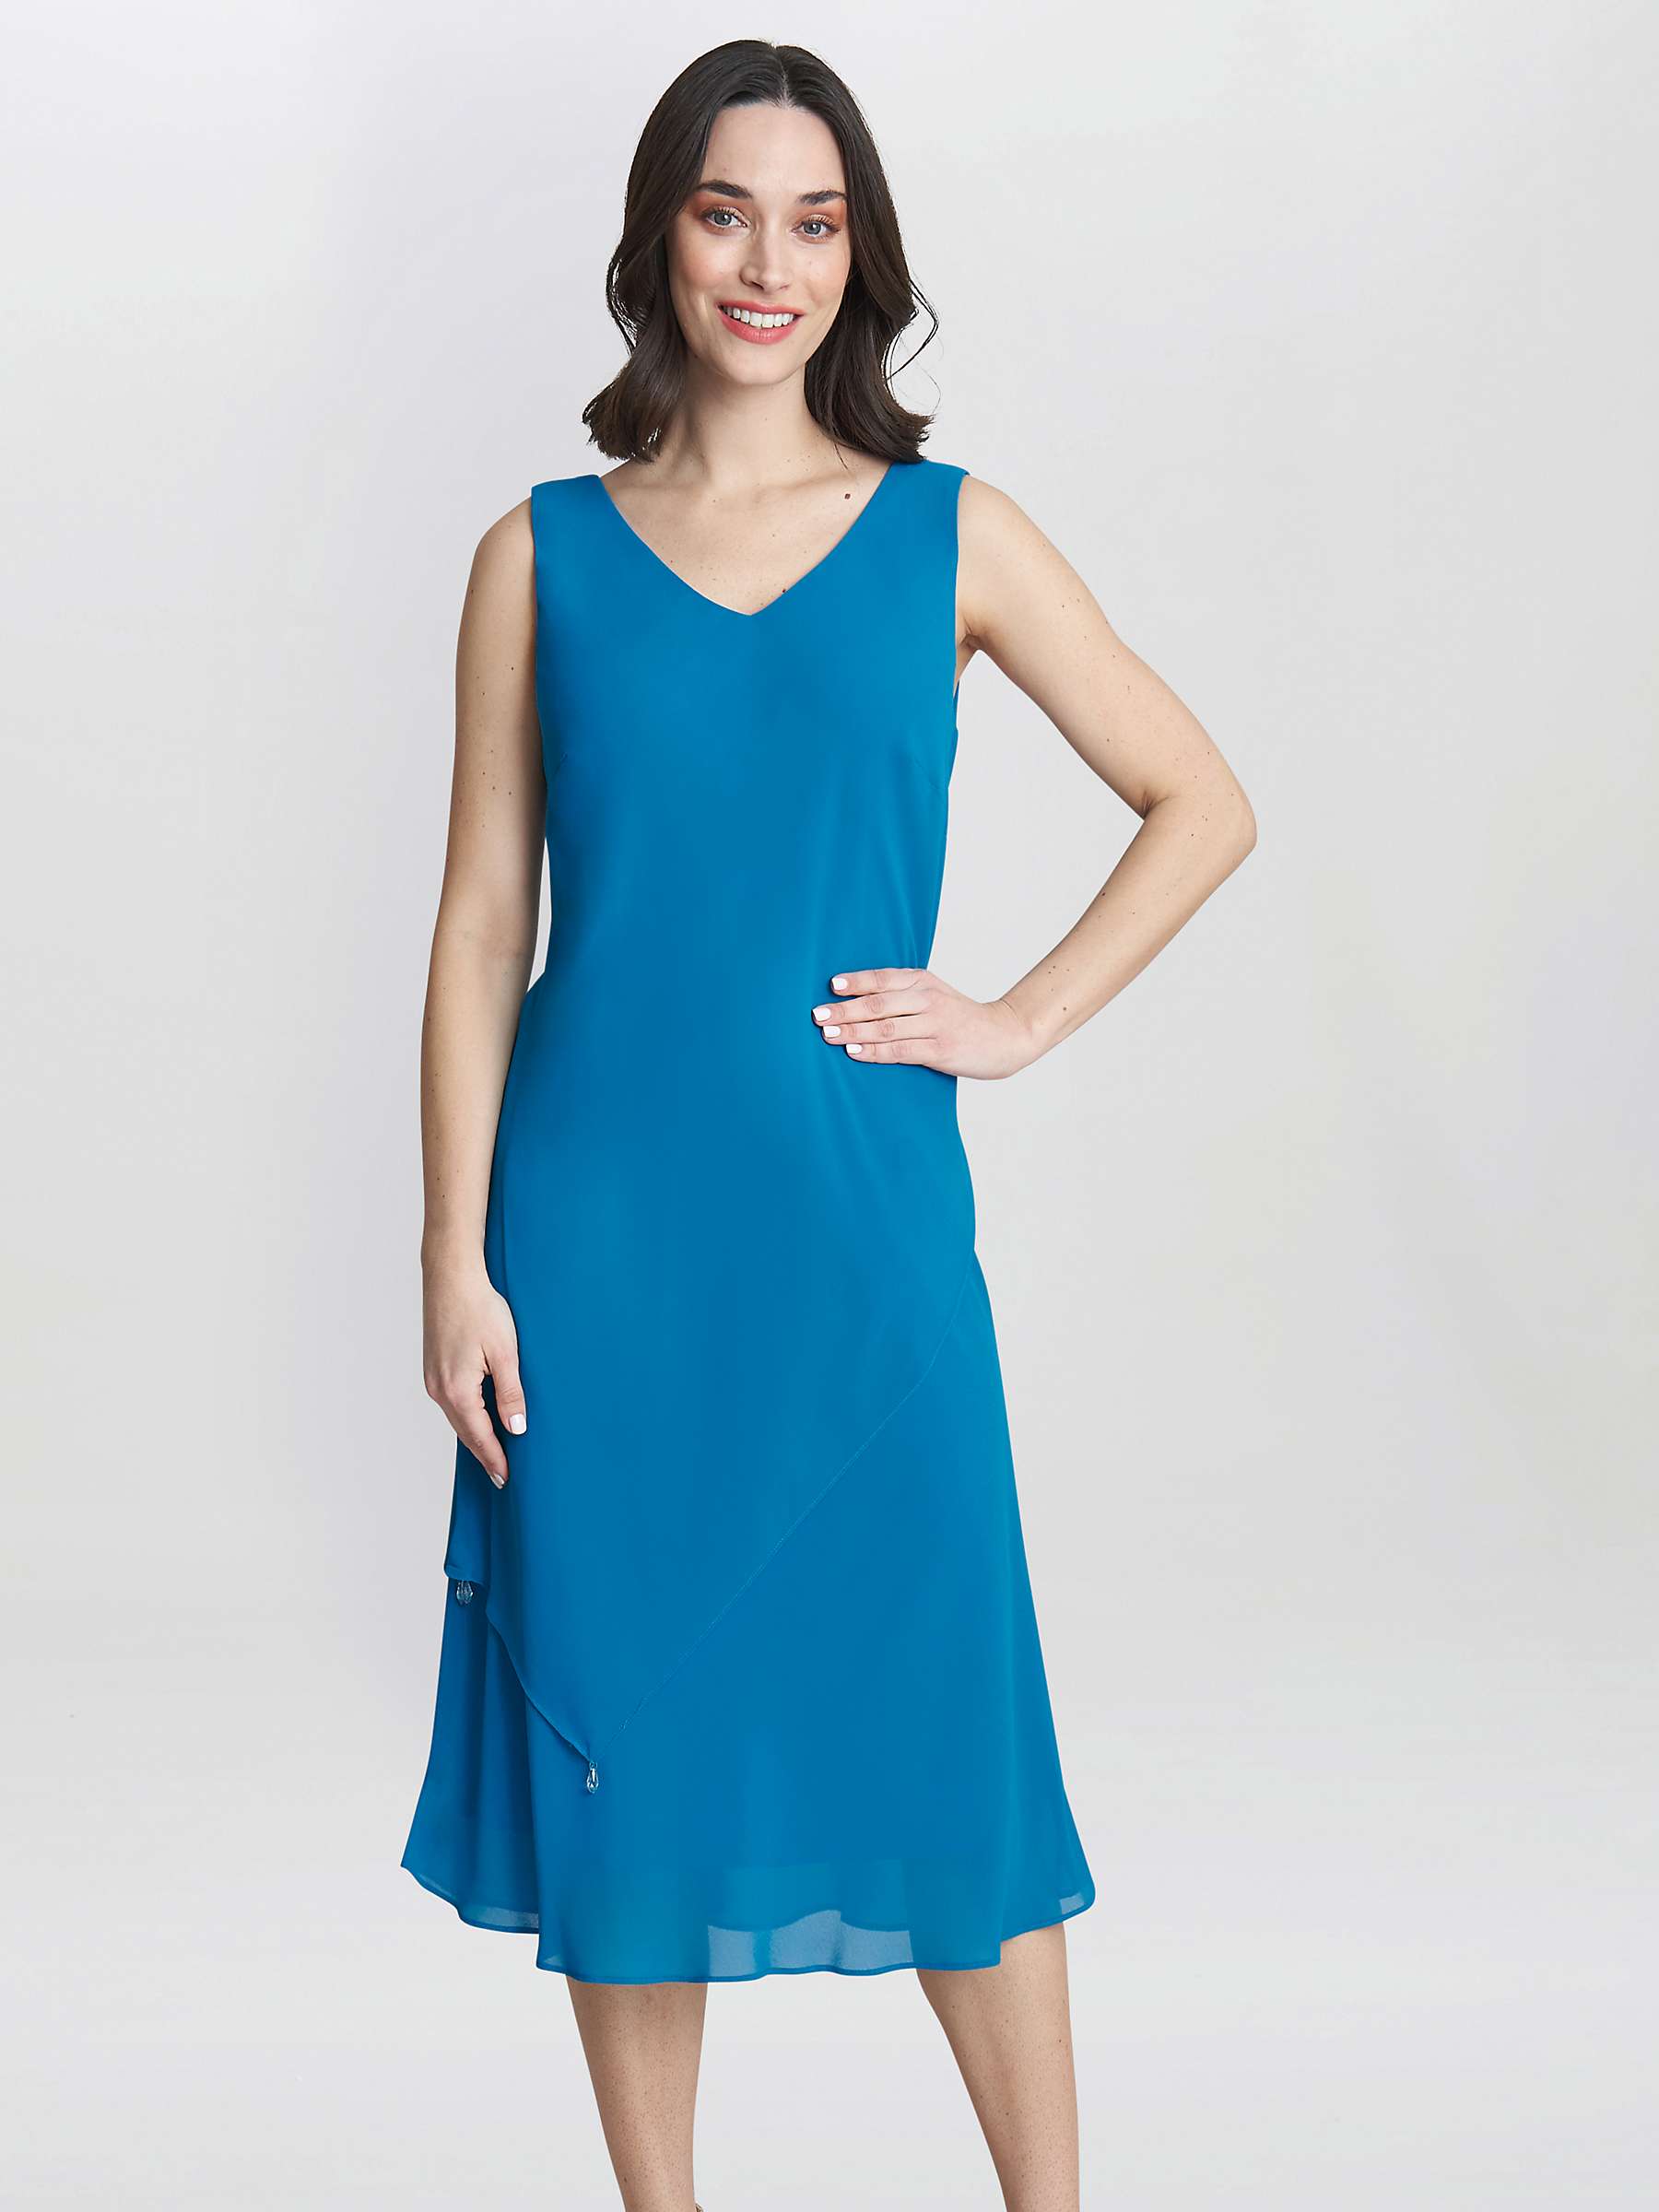 Buy Gina Bacconi Rita Two Piece Jacket and Dress, Blue Online at johnlewis.com